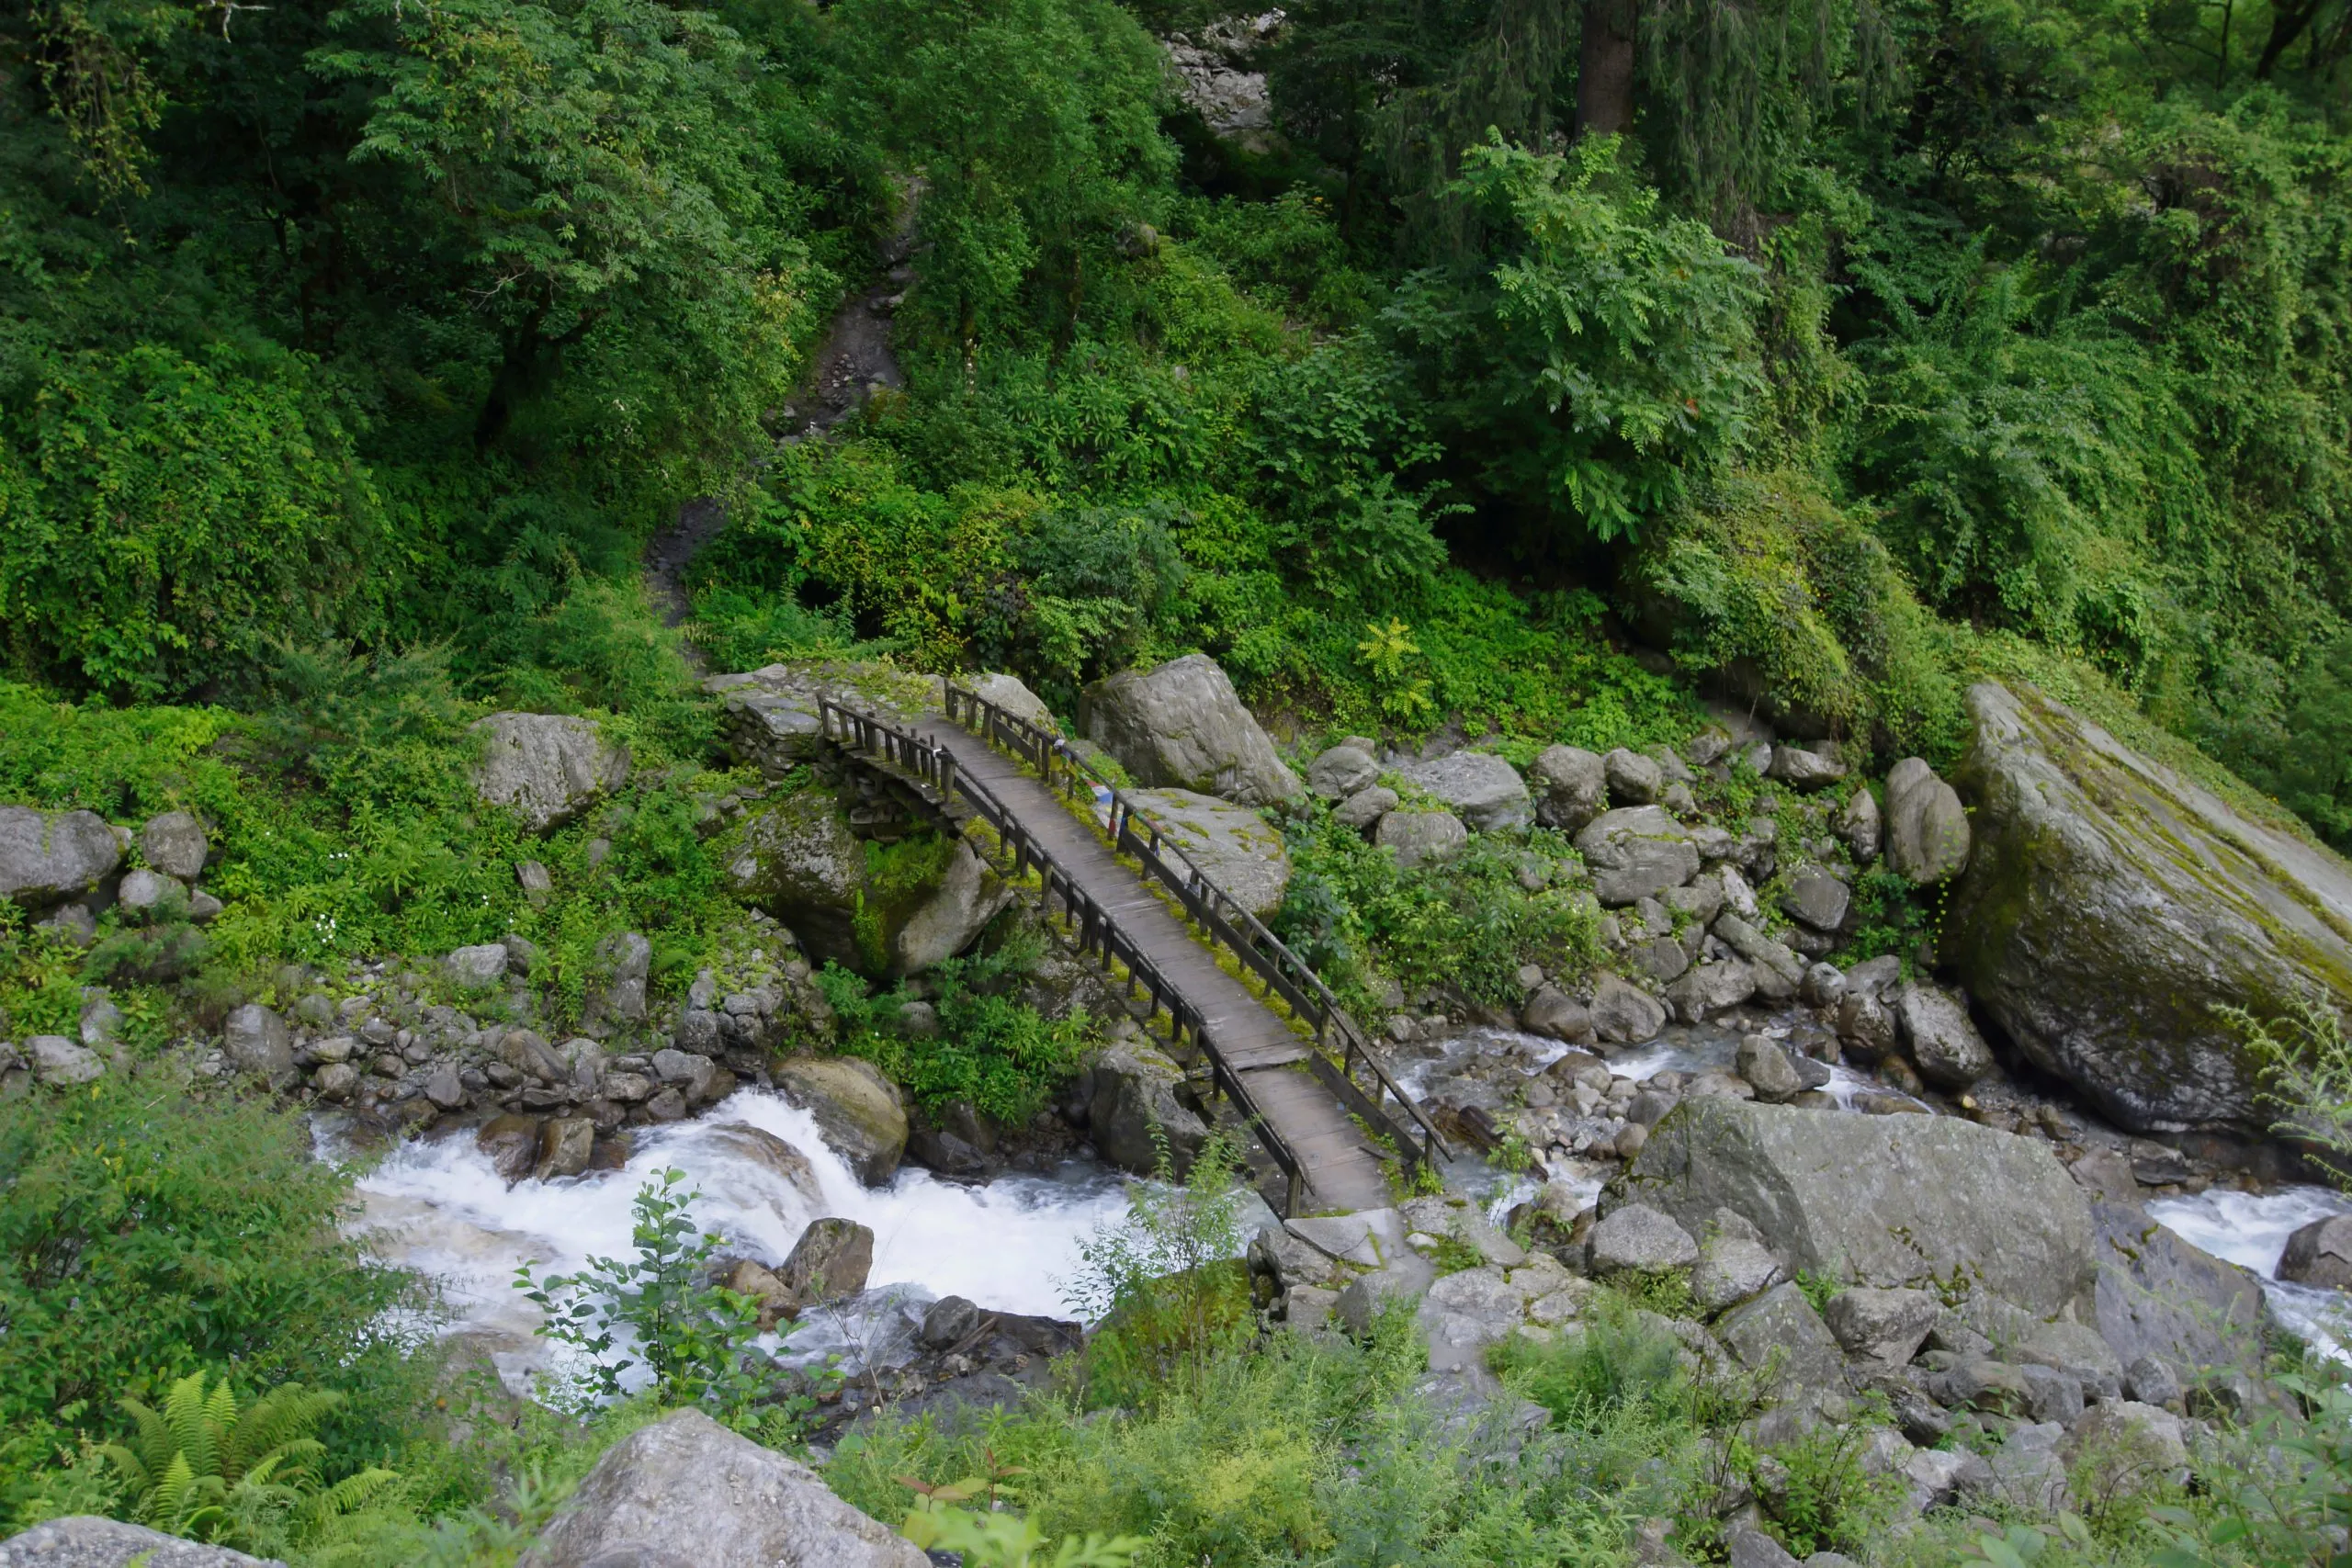 Small wooden bridge to cross a stream on the eastern side of the Annapurna circuit.